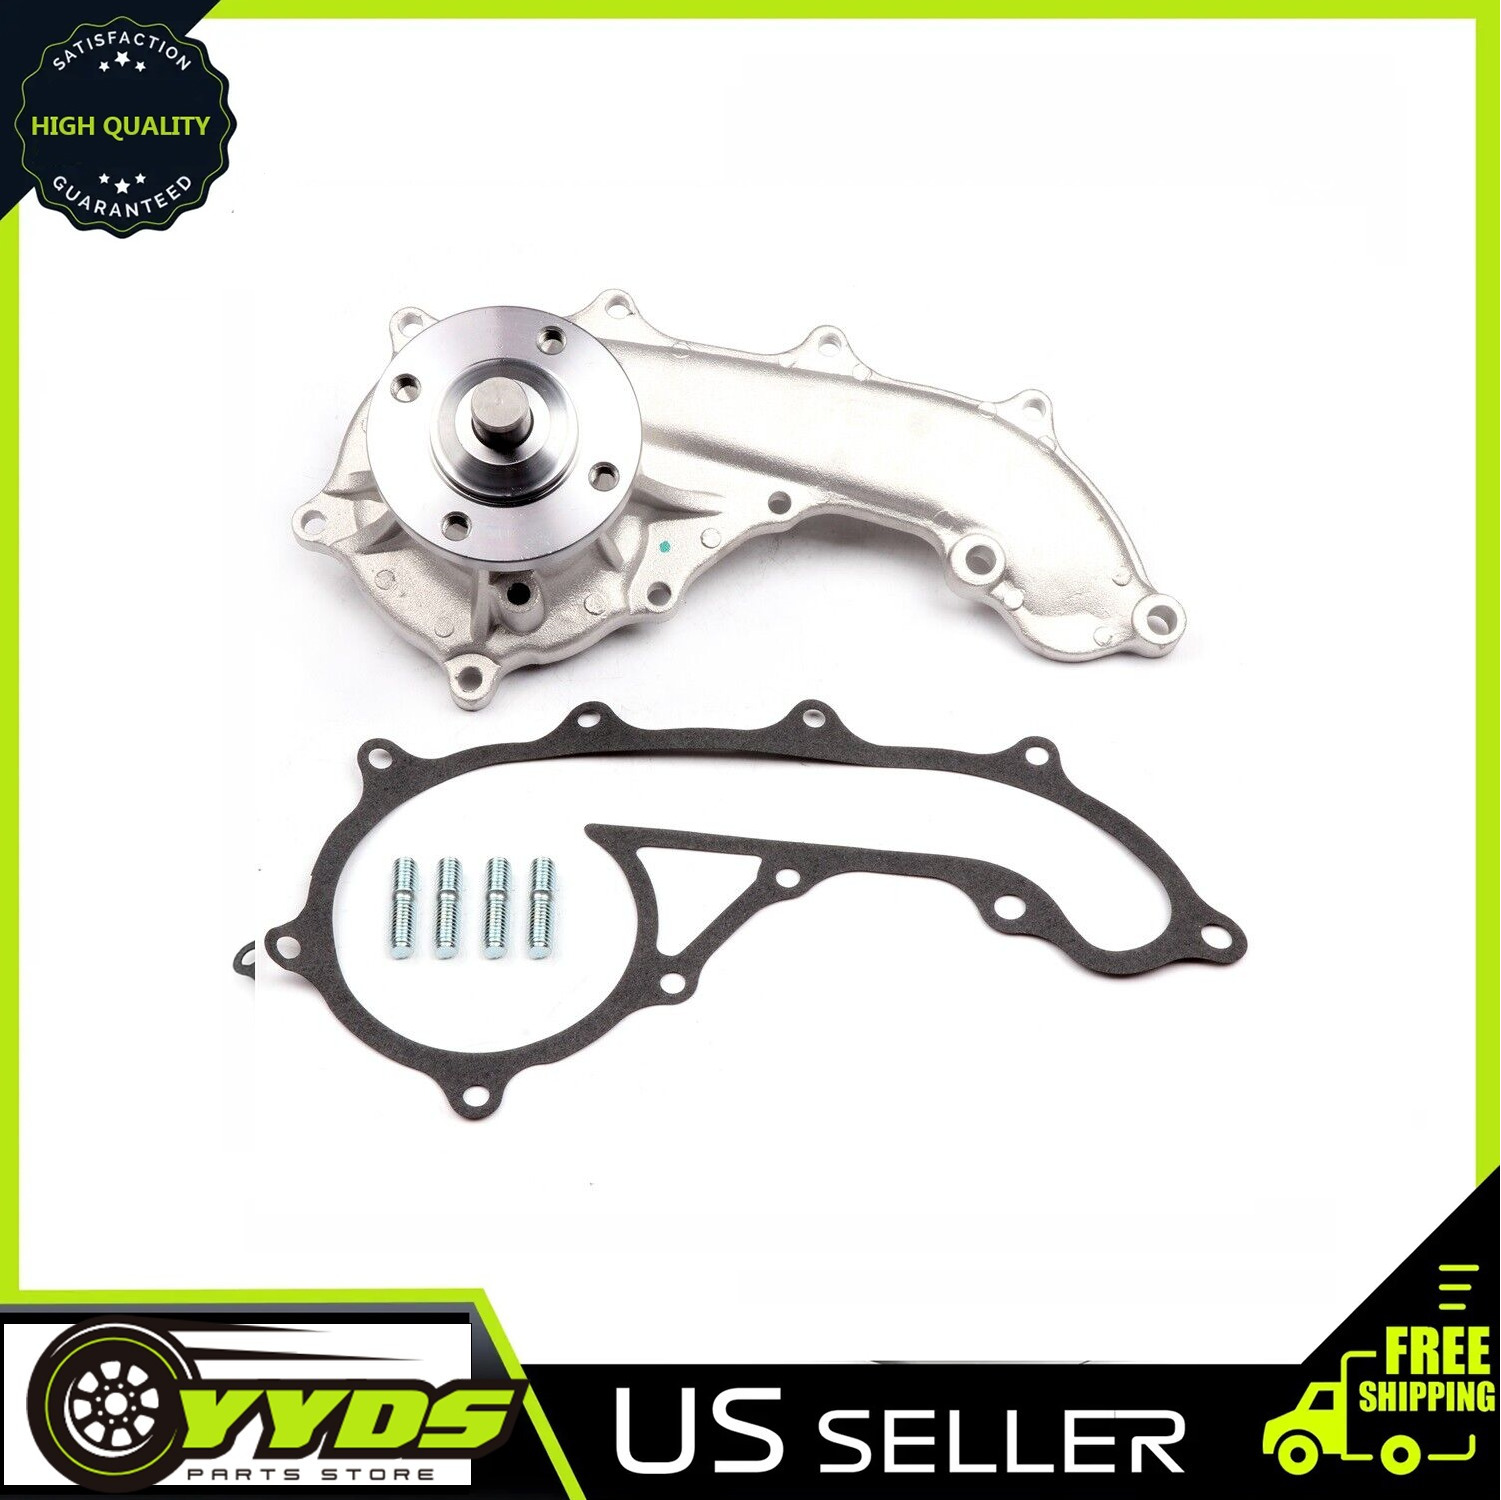 Brand New Water Pump For Toyota Tacoma 4RUNNER T100 2.7L I4 DOHC